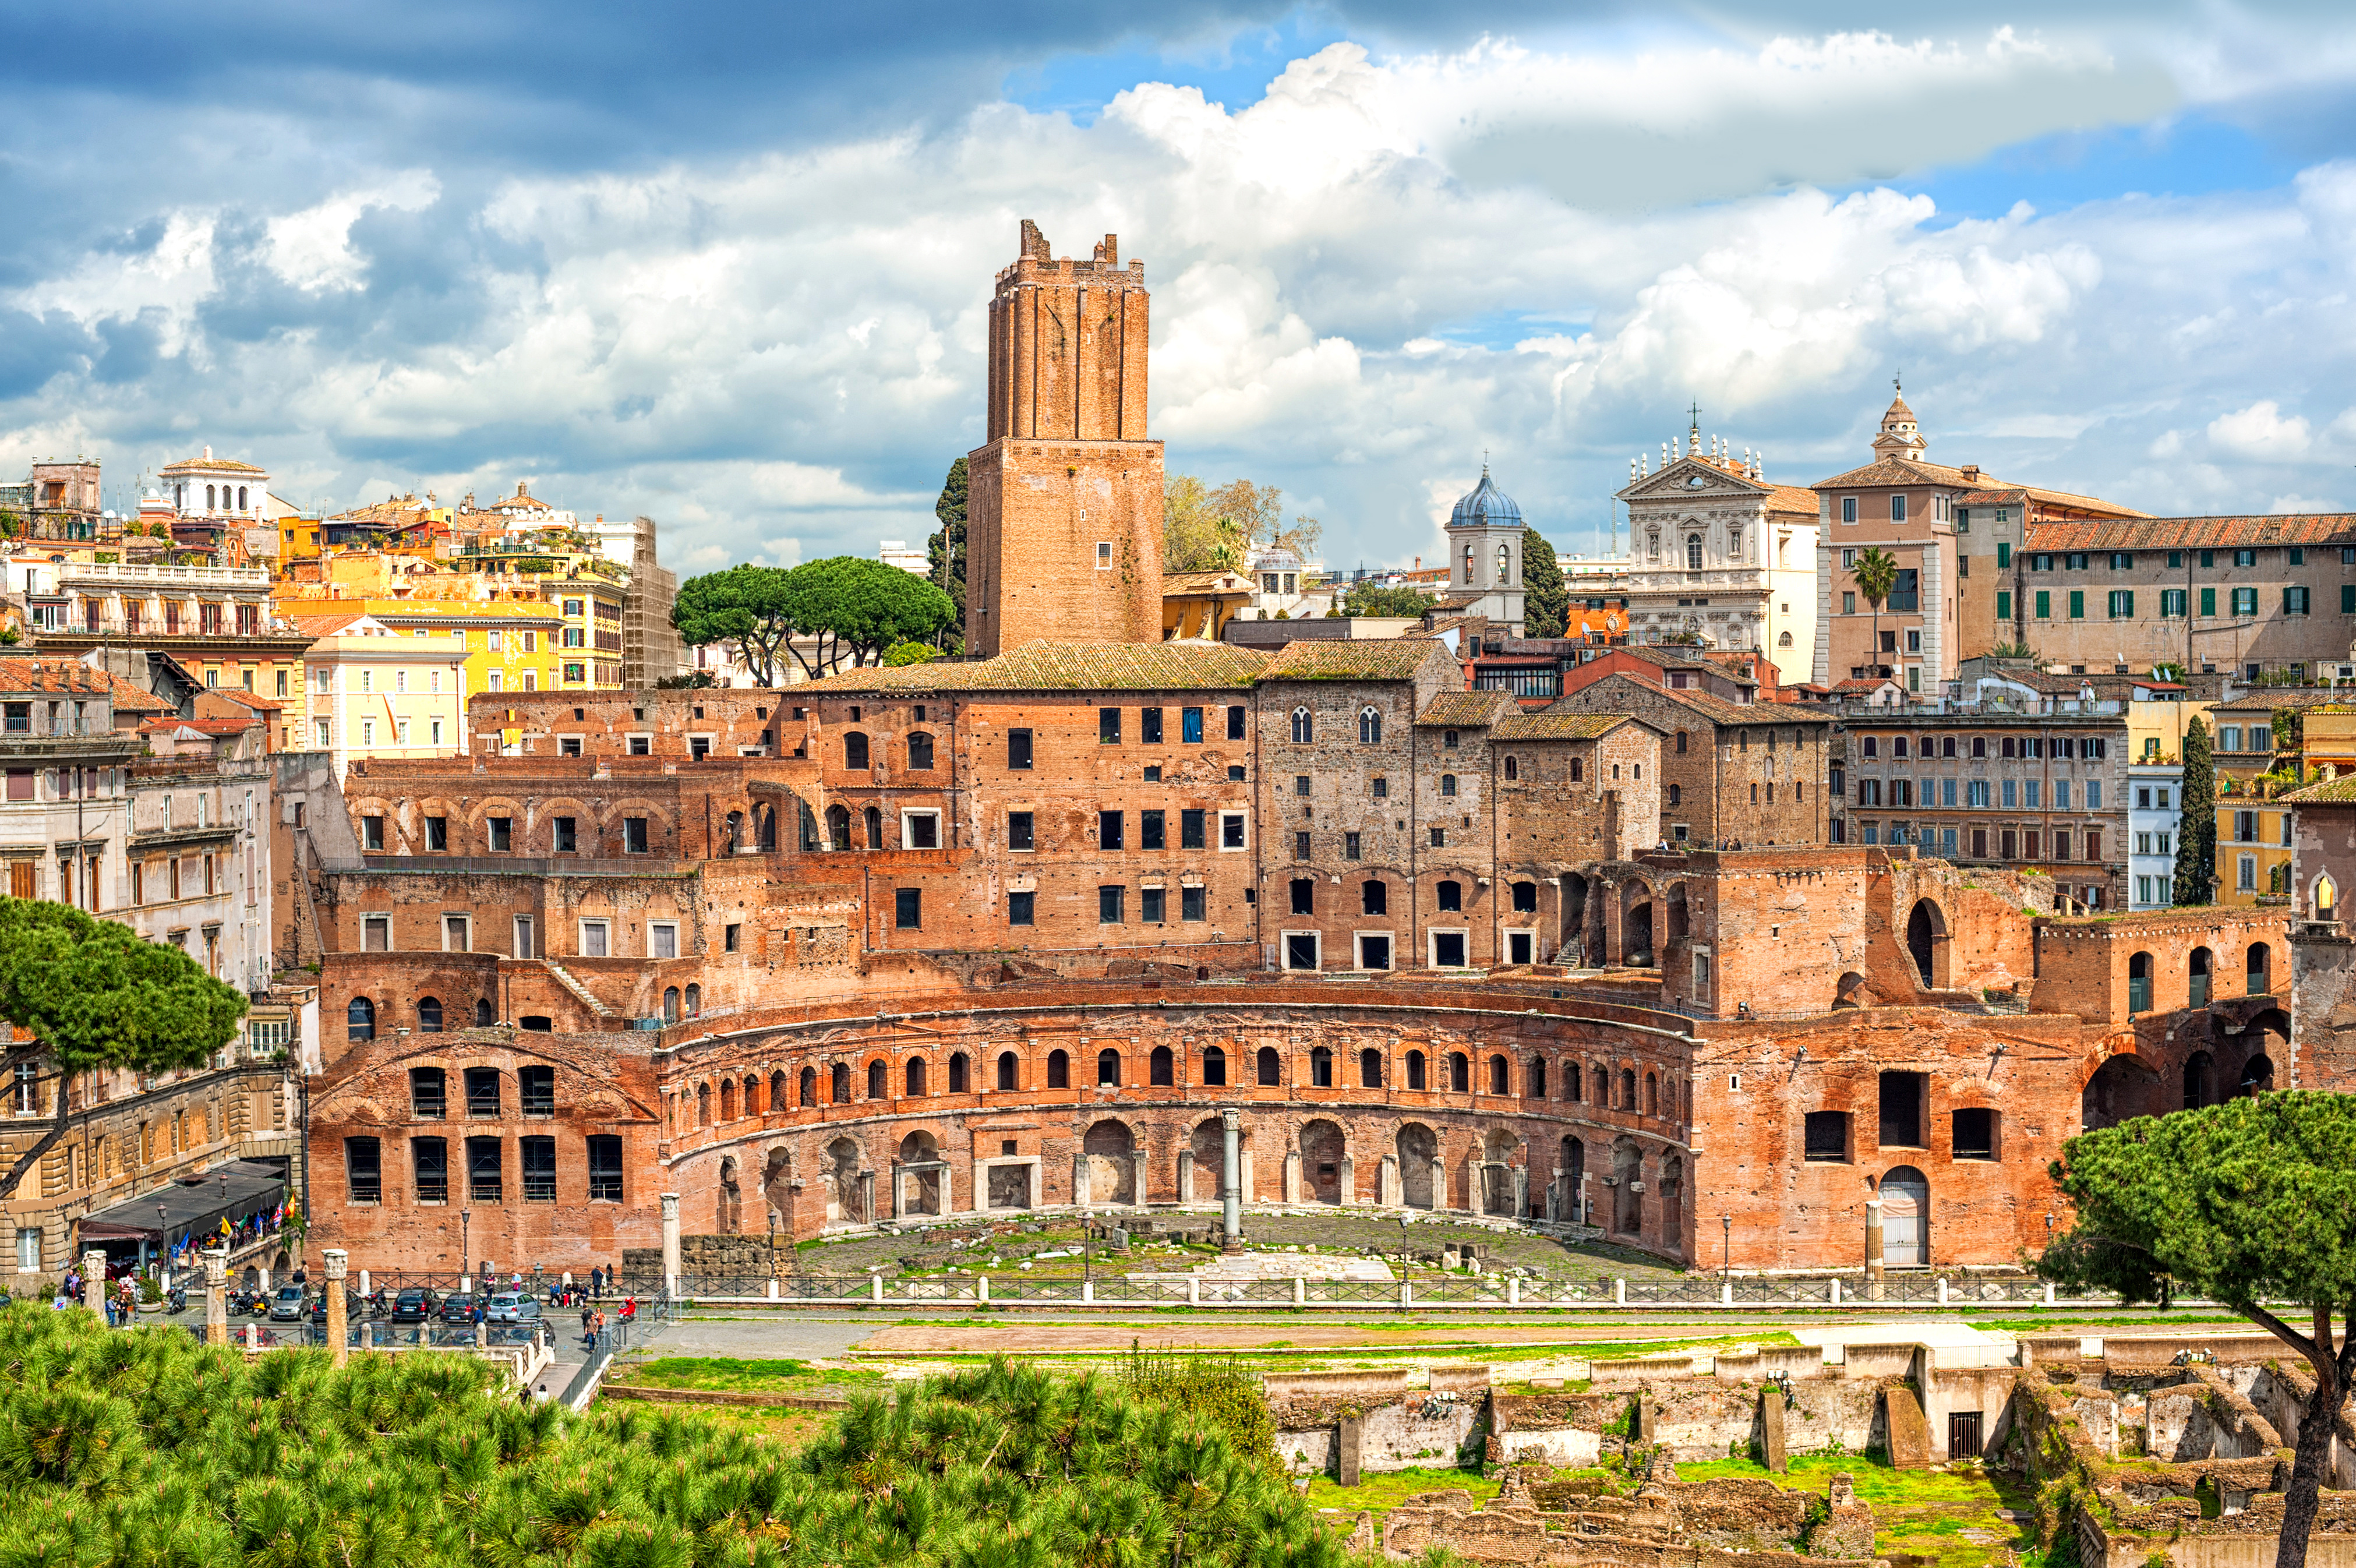 View of The Markets of Trajan constitute